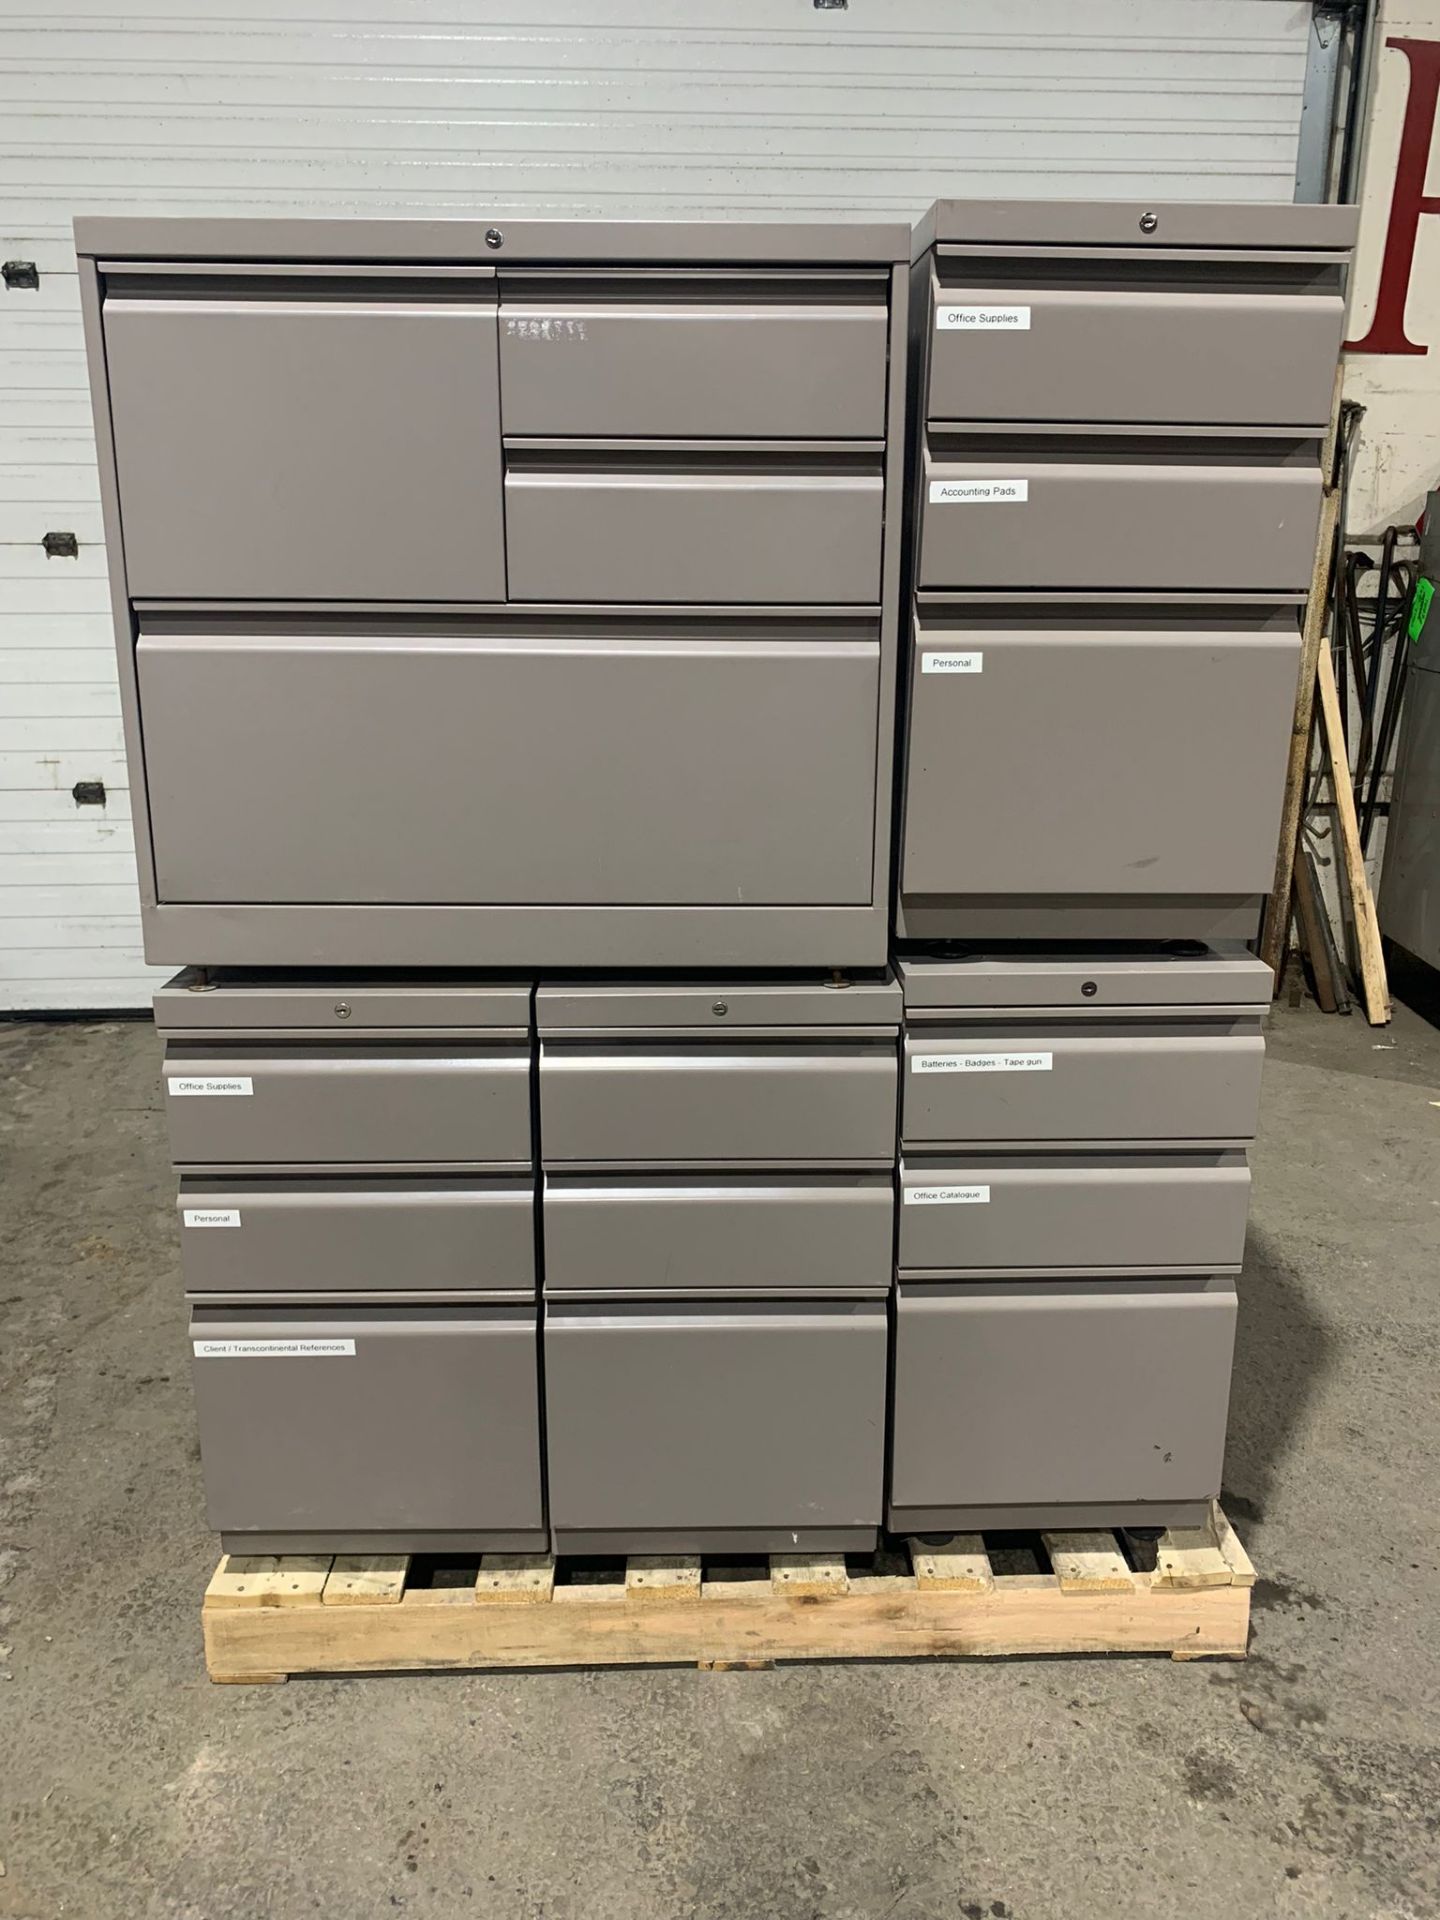 Lot of 5 (5 units) Office Cabinets with 16 drawers total